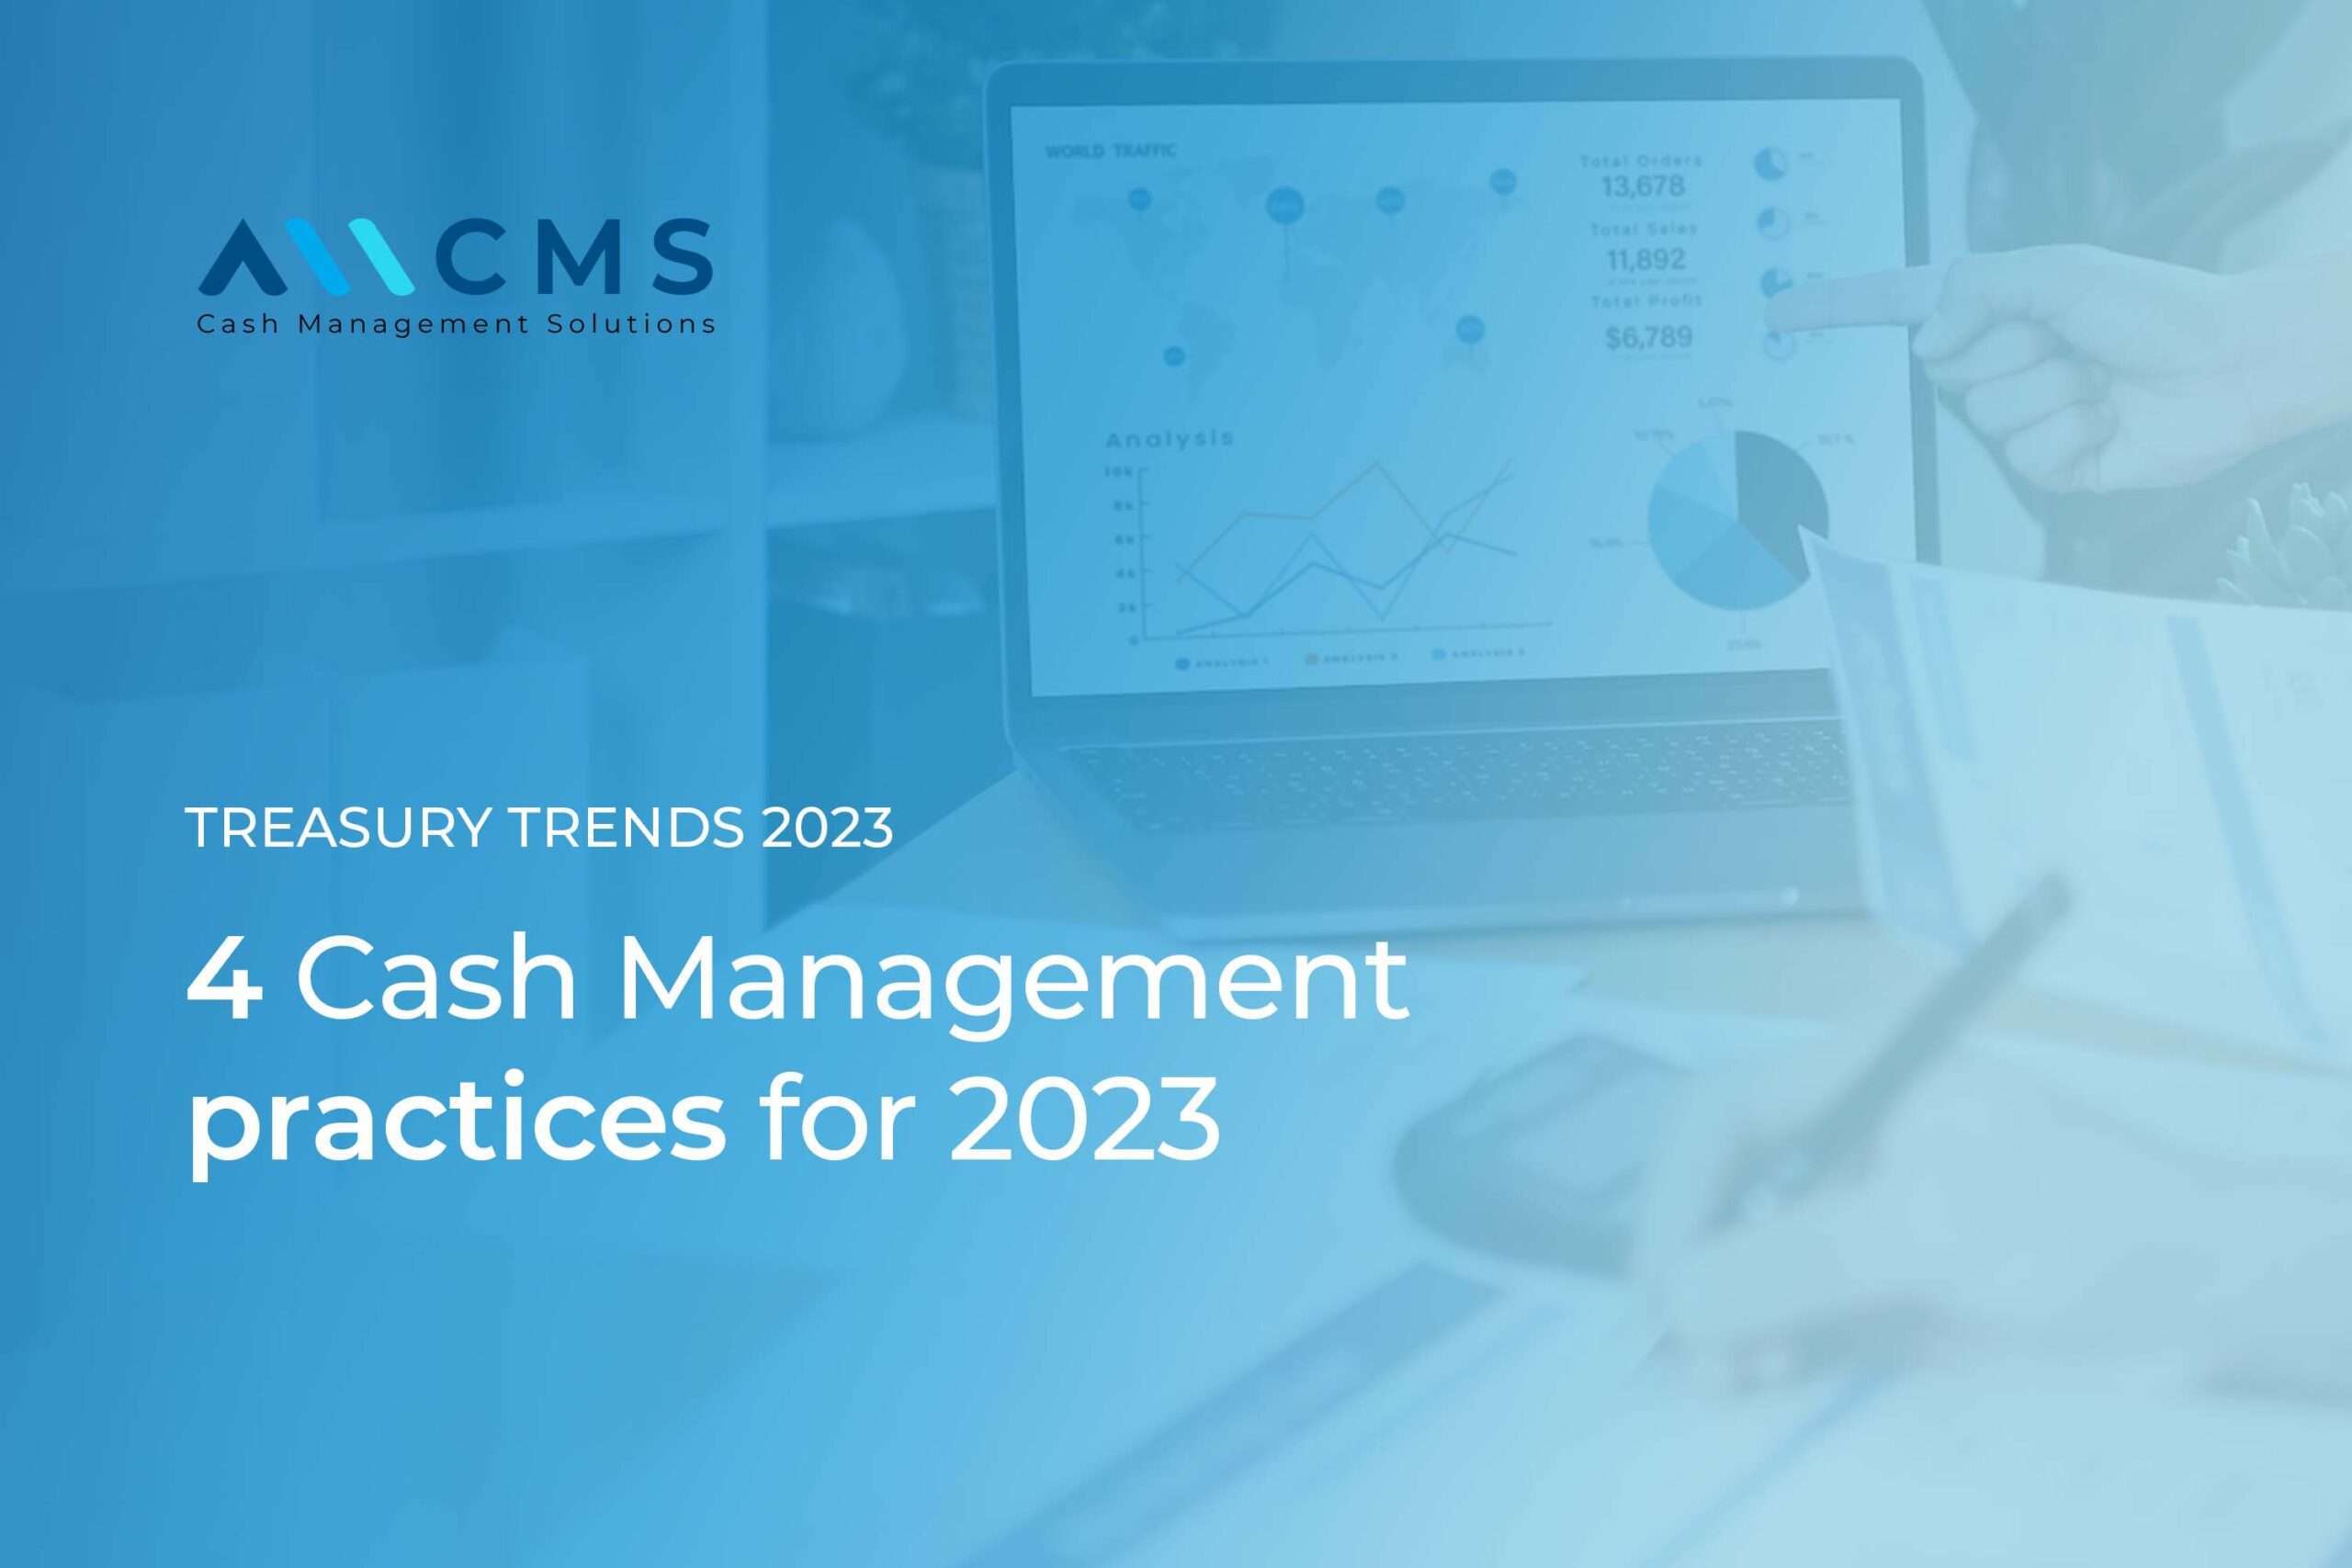 Treasury Cash Management Practices Trends 2023 All CMS